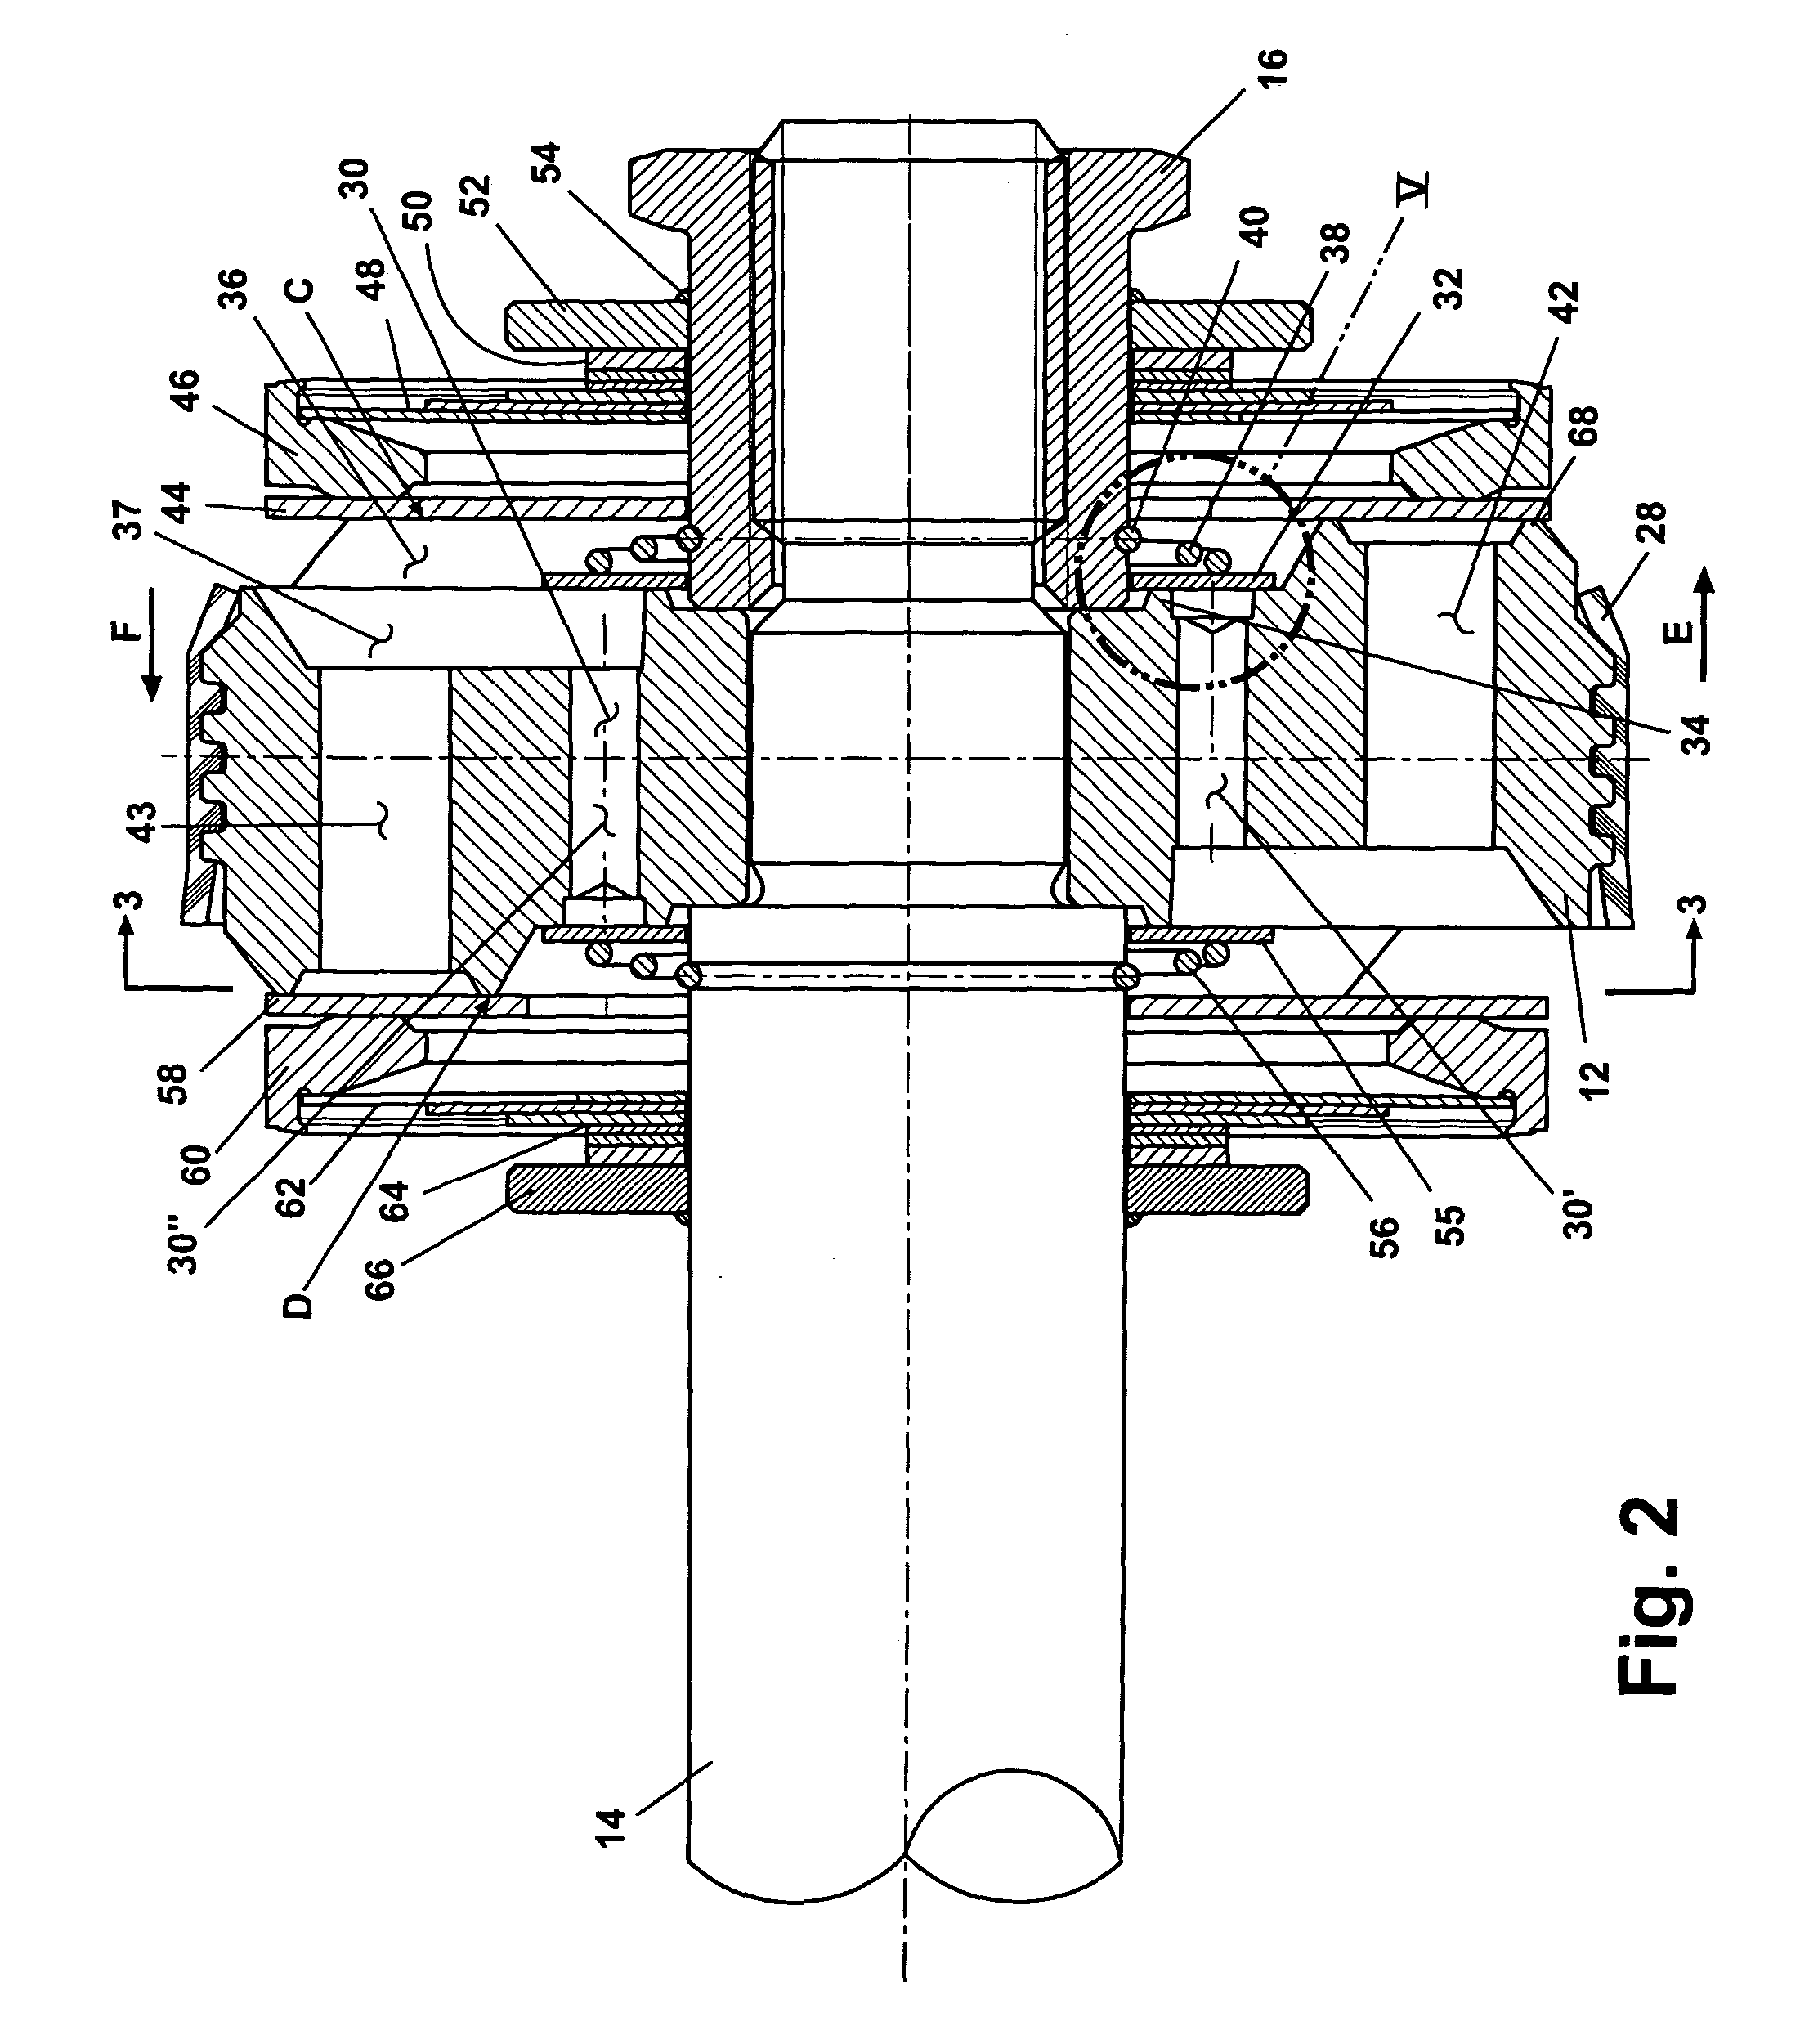 Monotube piston valving system with selective bleed